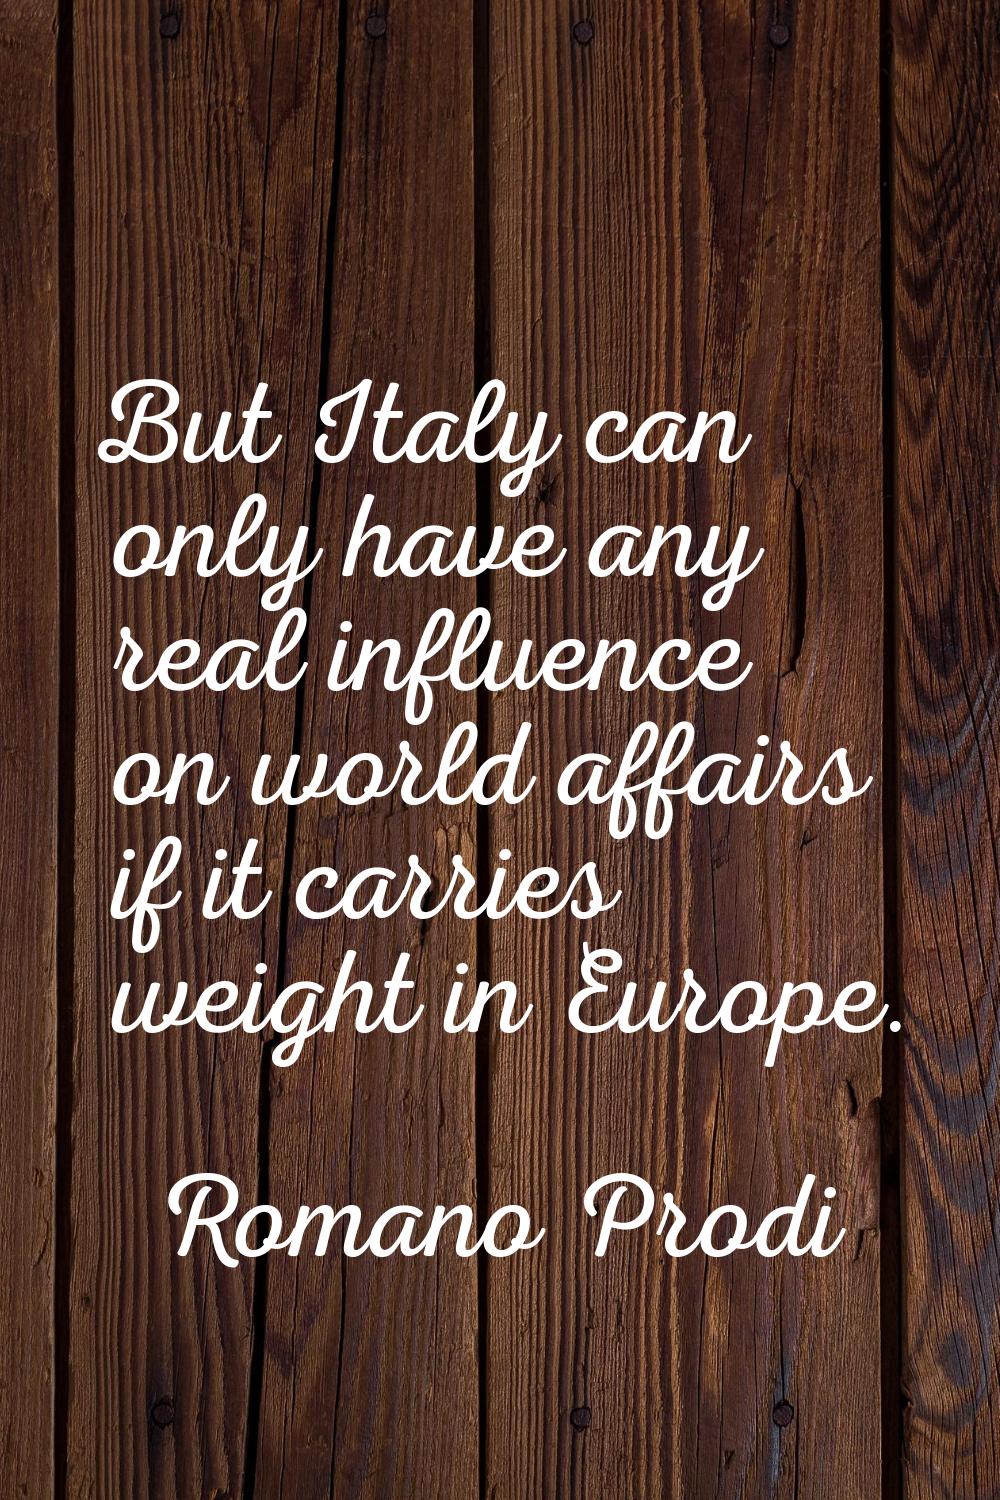 But Italy can only have any real influence on world affairs if it carries weight in Europe.